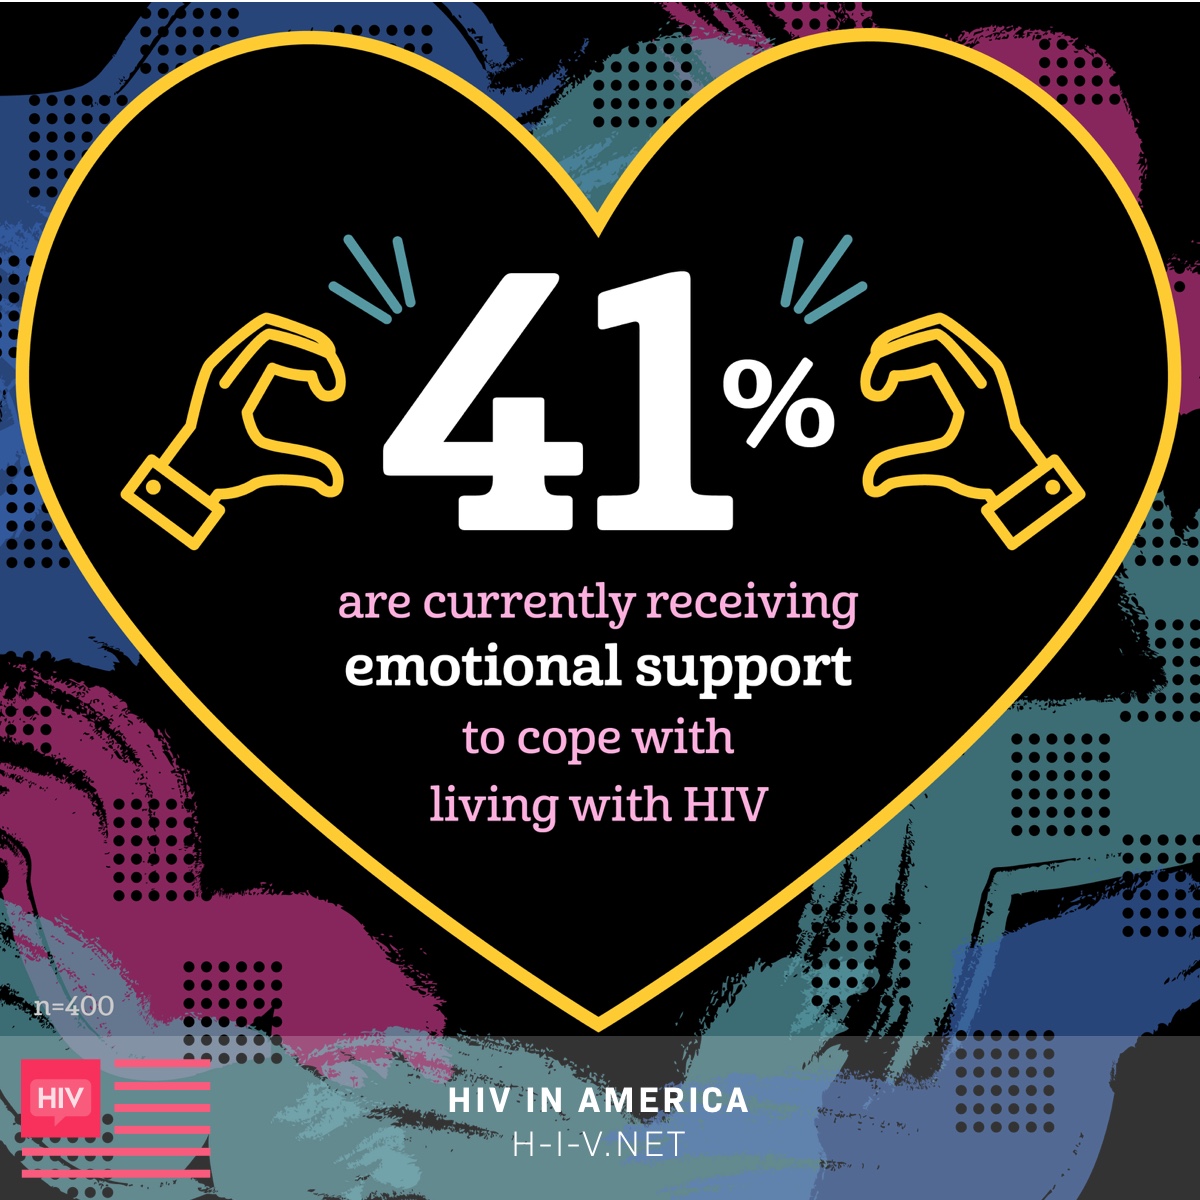 41% of people are currently receiving emotional support to cope with living with HIV